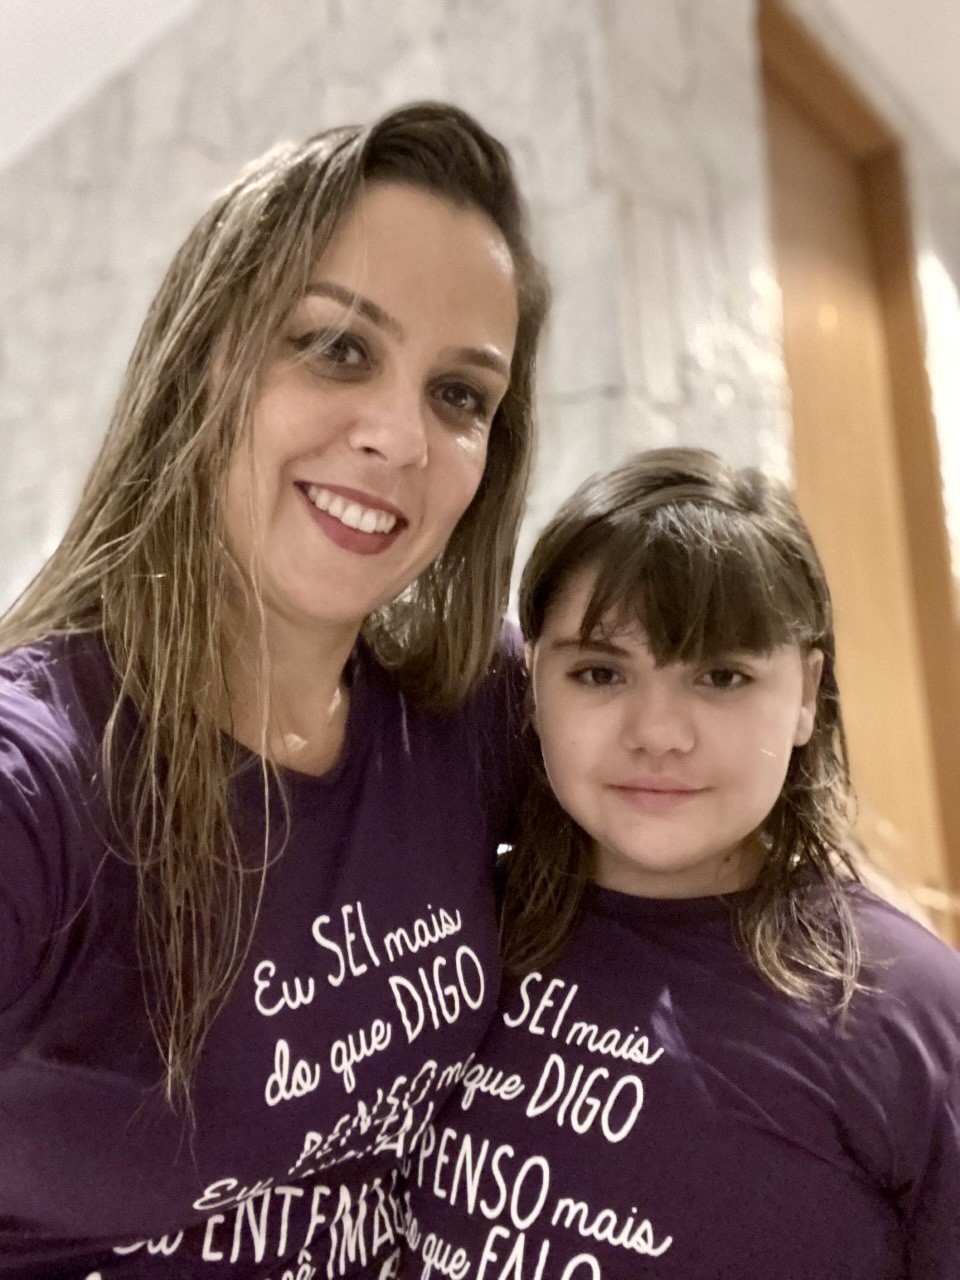 Fabiana Garofalo Colavini Cunha and her daughter Ana Beatriz: The fight for the transmission of speech apraxia (Photo: personal archive)